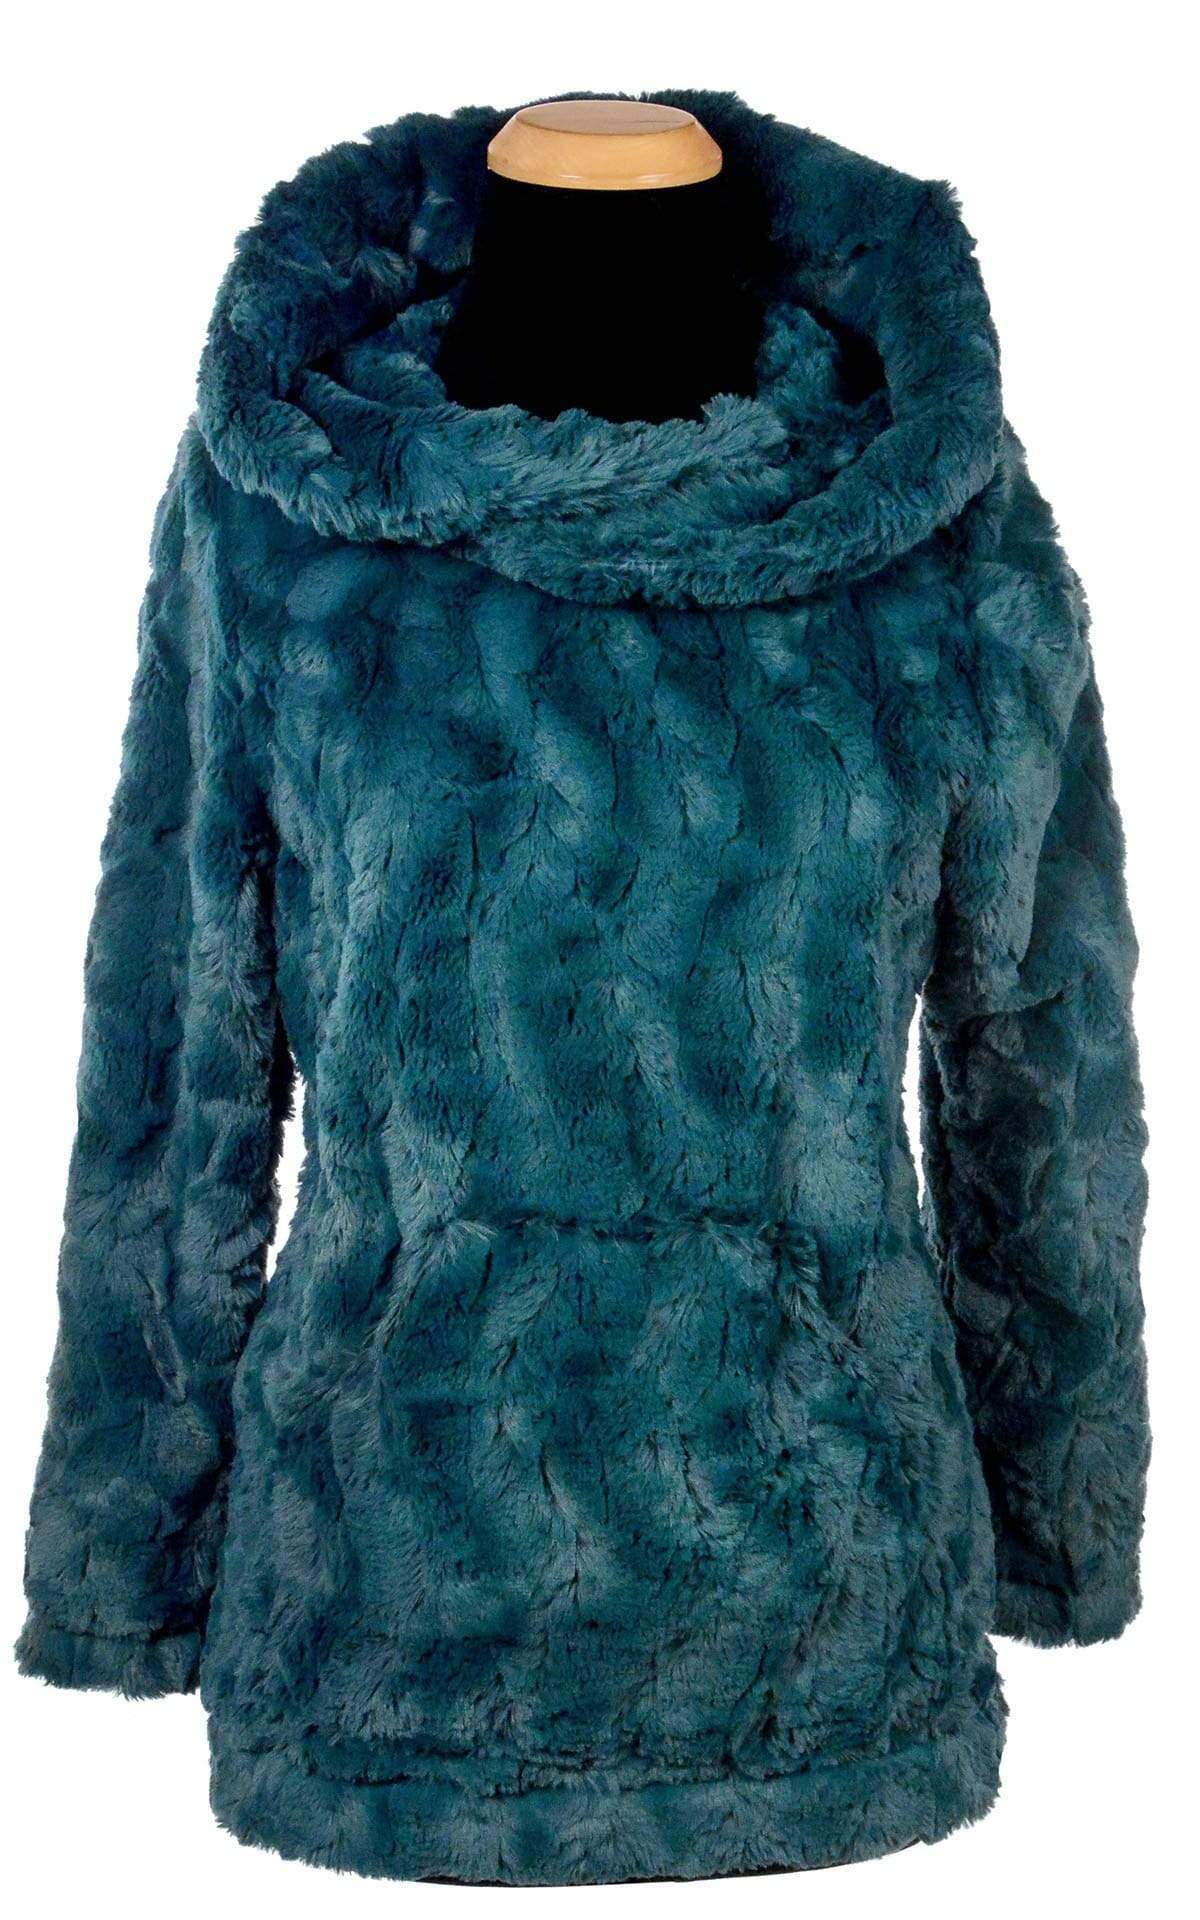 Hooded Lounger - Rosebud Faux Fur - Pandemonium Millinery Faux Fur Boutique  made in Seattle WA USA